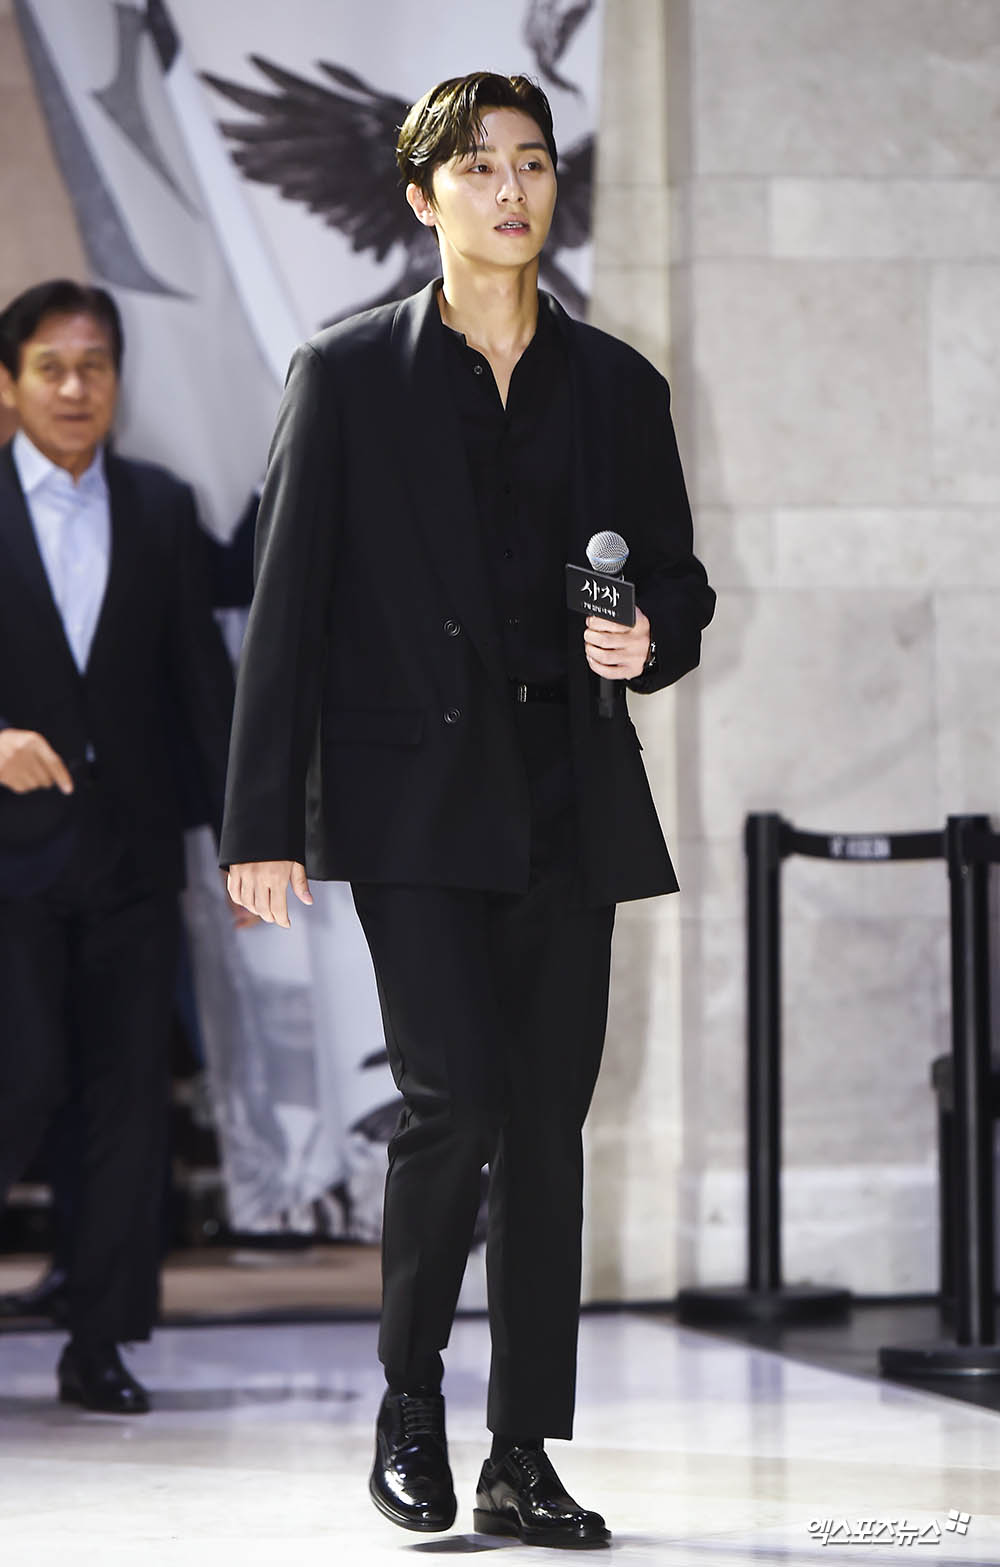 Actor Park Seo-joon, who attended the VIP premiere of the movie Lion at Lotte Cinema World Tower in Shincheon-dong, Seoul on the afternoon of the 30th, is appearing on stage.